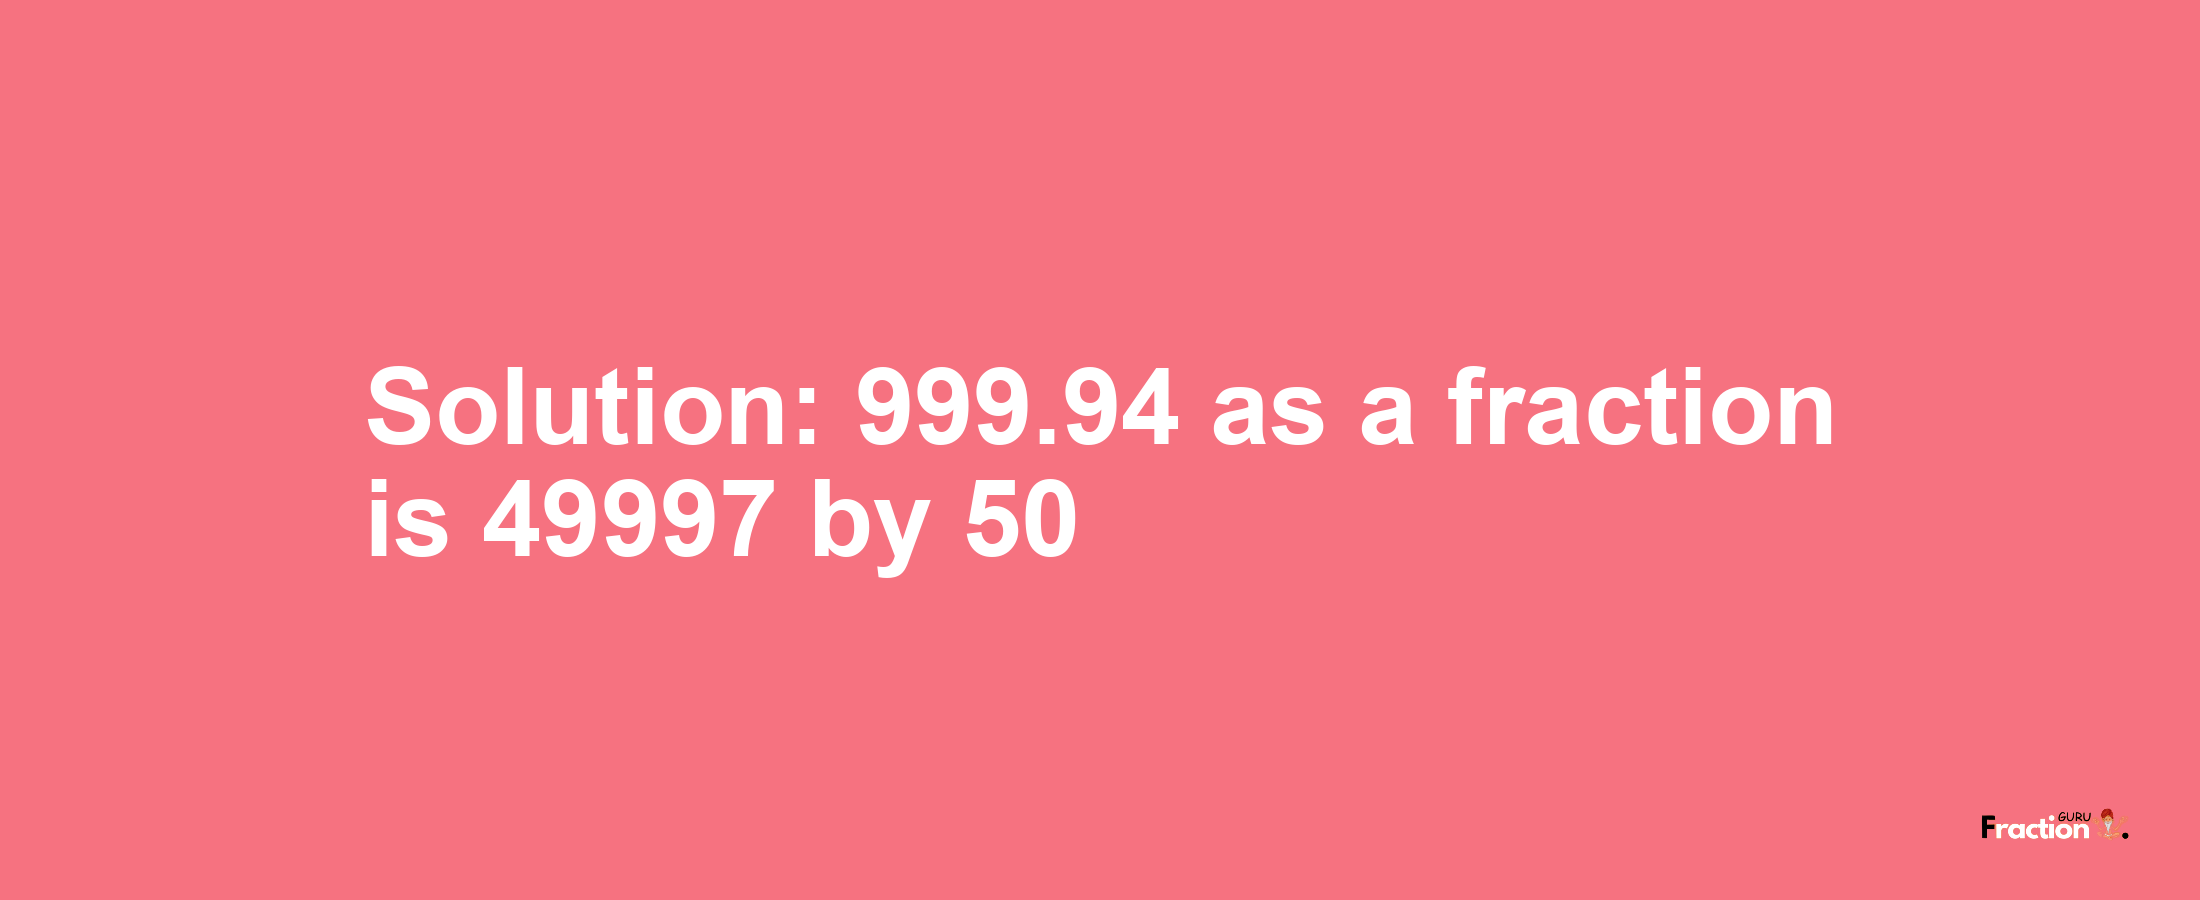 Solution:999.94 as a fraction is 49997/50